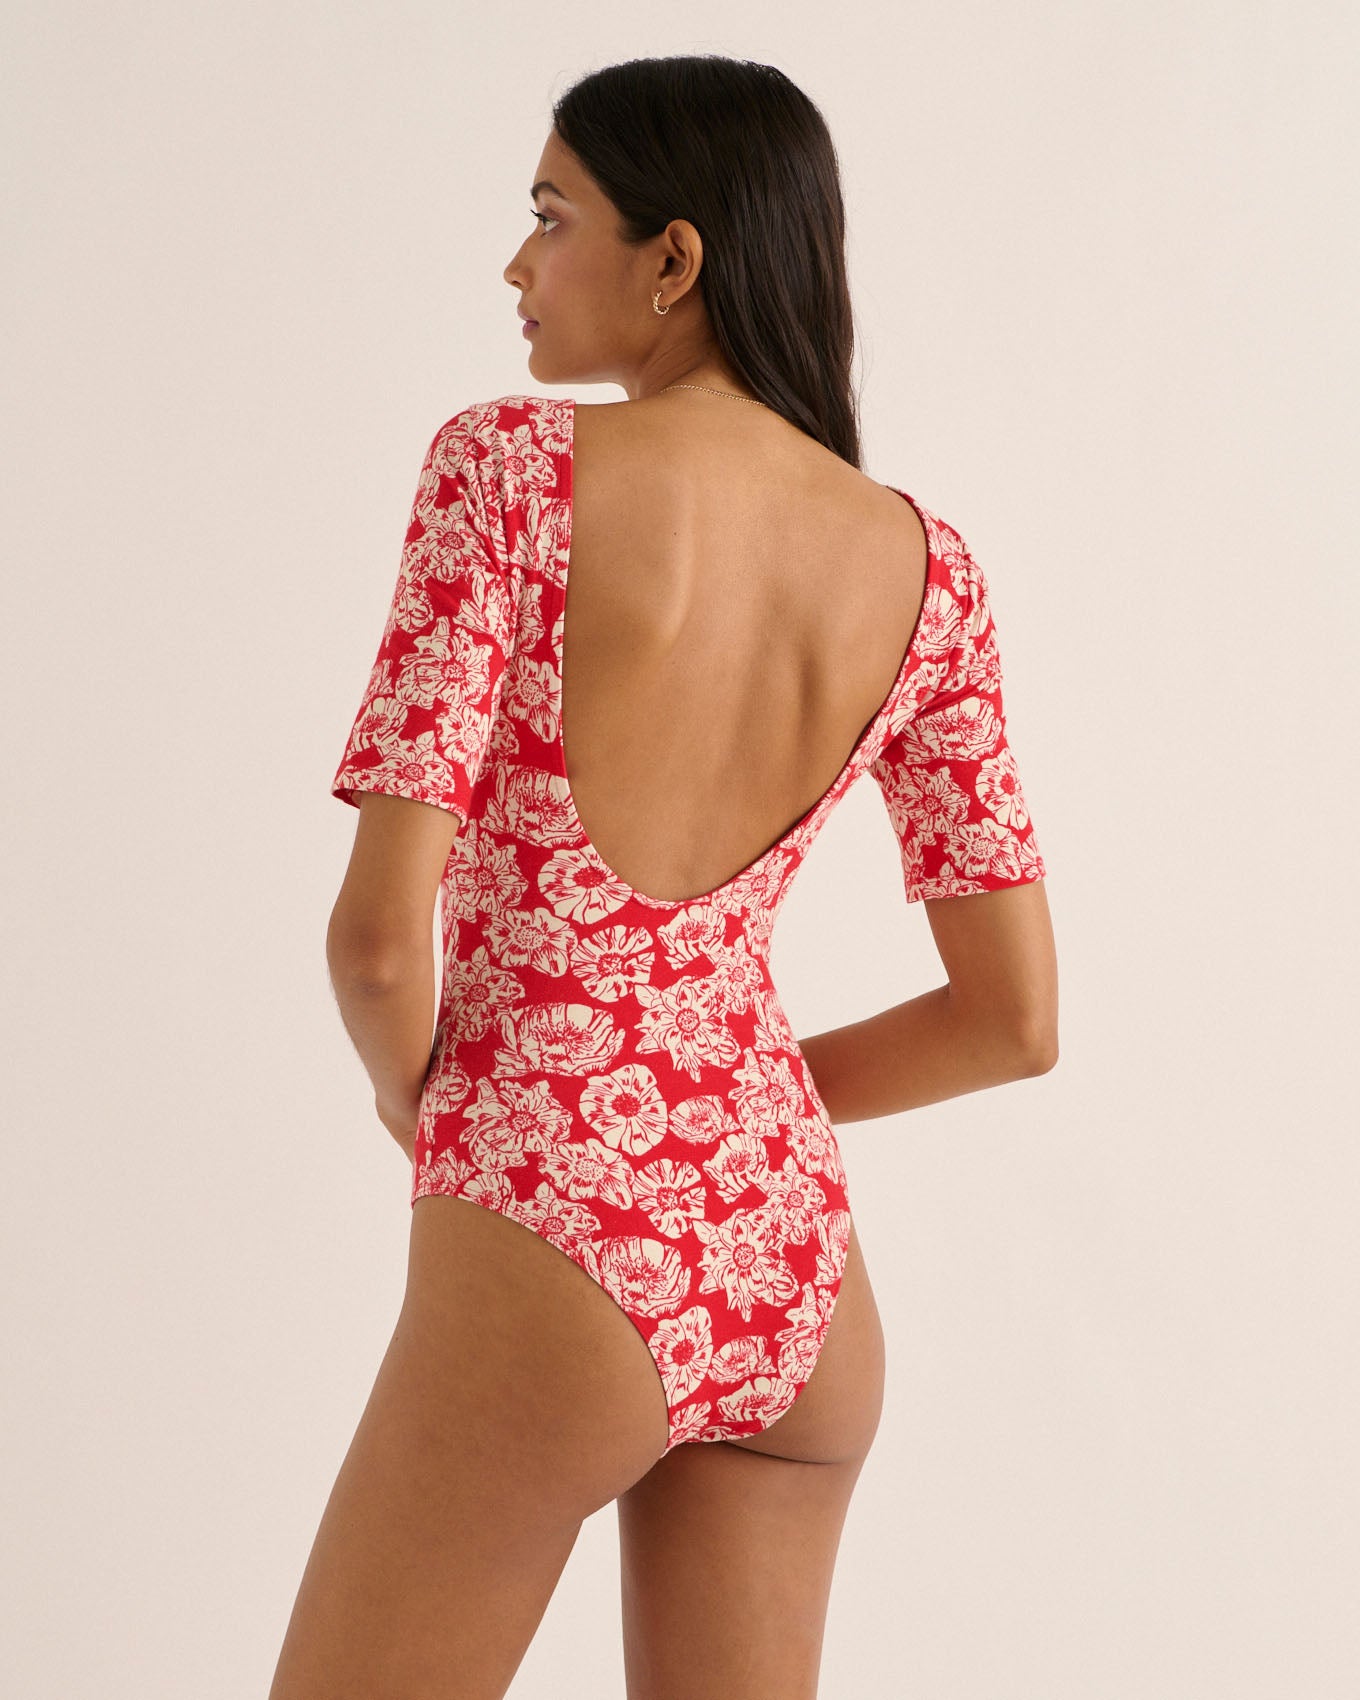 Heureuse bodysuit with red and ecru flower party print